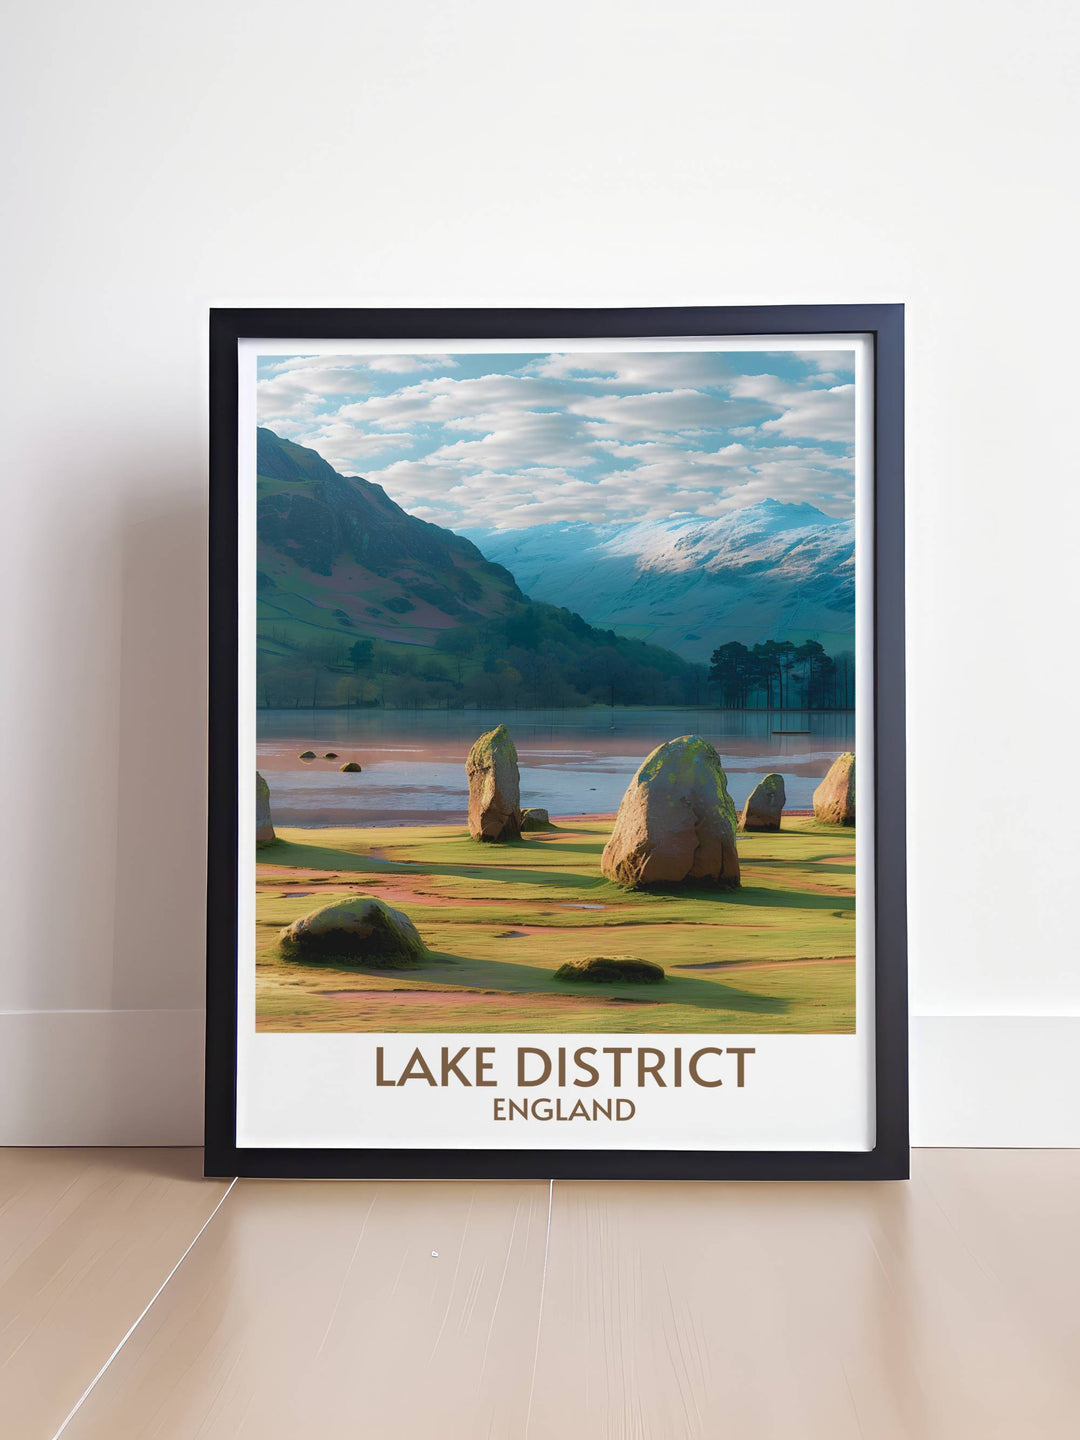 Stunning Lake District poster featuring the iconic Castlerigg Stone Circle. This beautifully detailed artwork highlights the natural beauty and historical significance of one of North West Englands most famous landmarks, ideal for travel art enthusiasts.